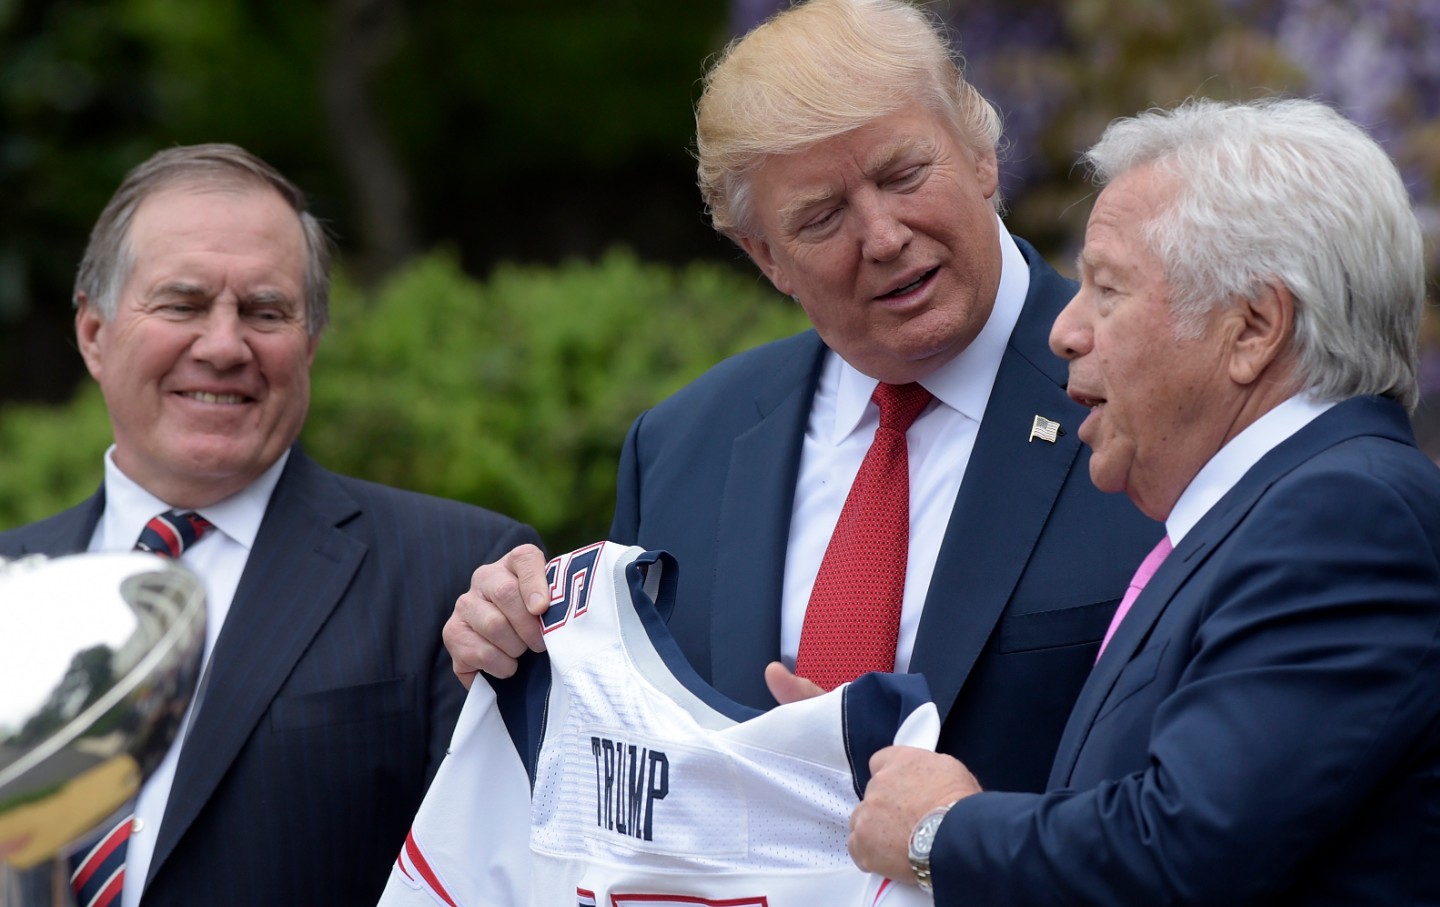 The NFL Is Now Part of Trump’s Reelection Project